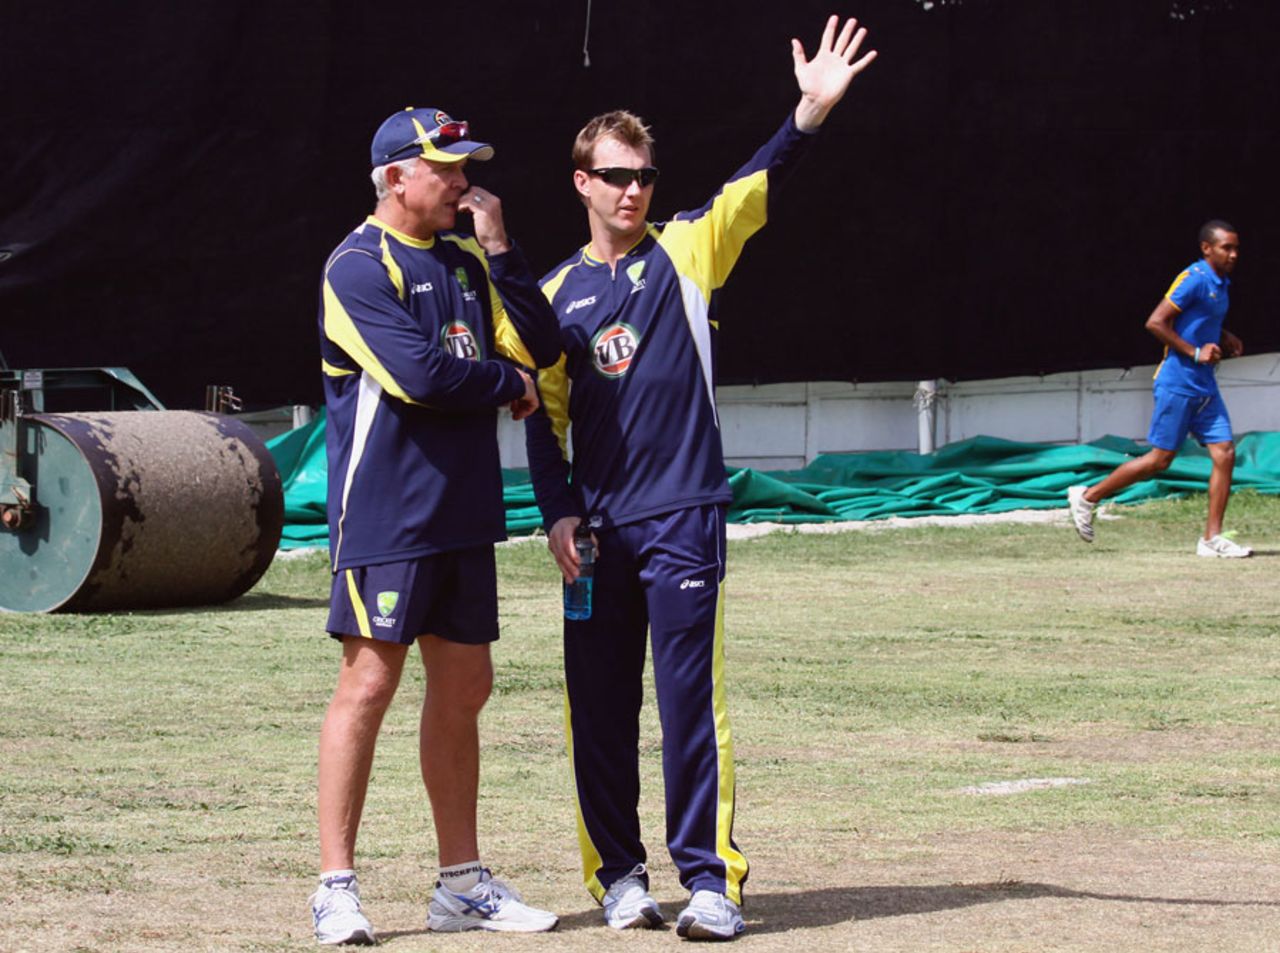 Craig McDermott and Brett Lee chat during a training session, Cape Town, October 12, 2011